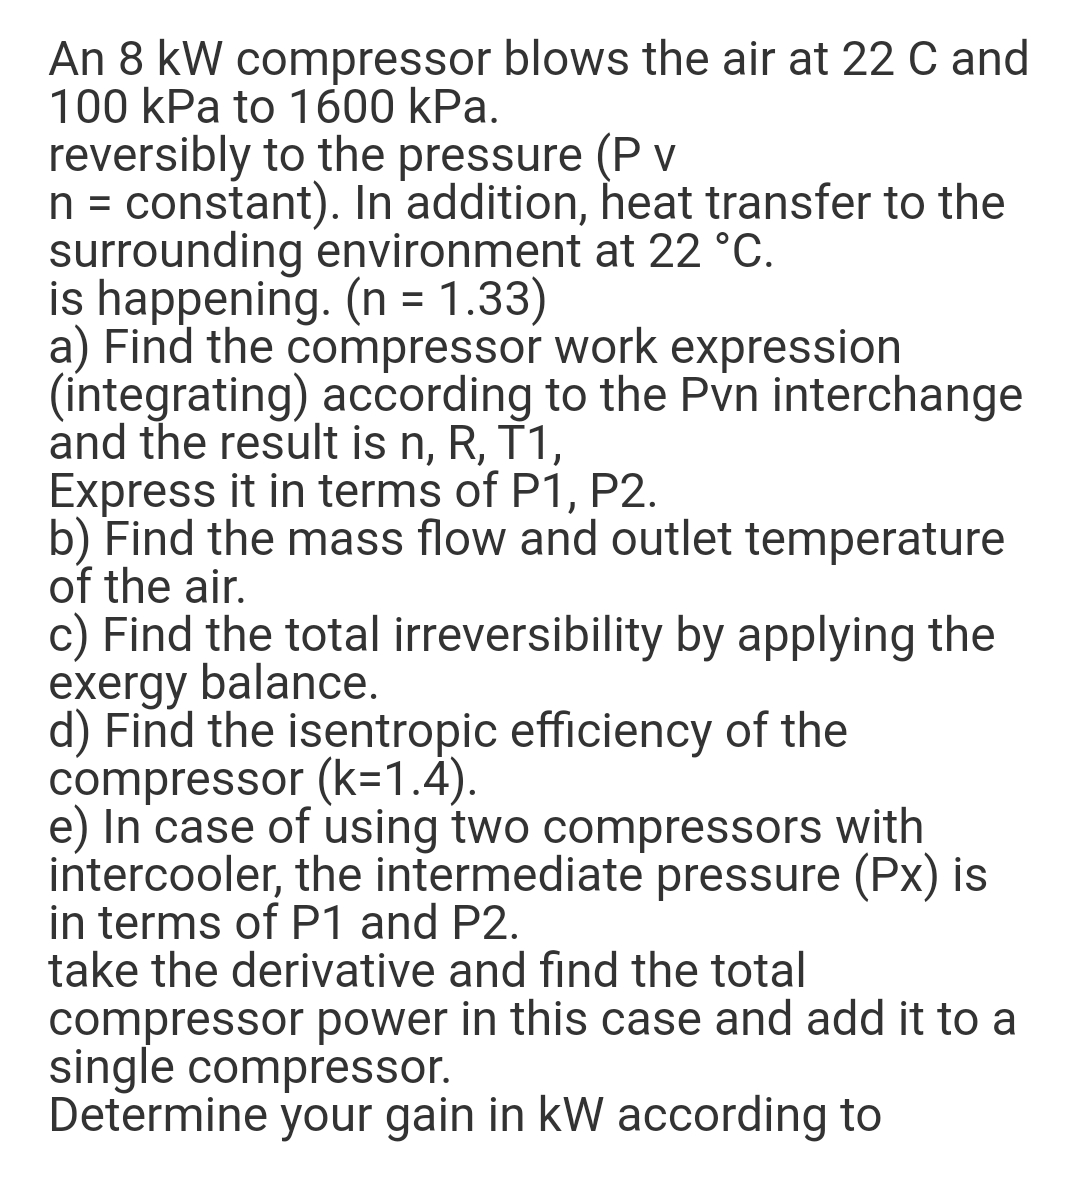 An 8 kW compressor blows the air at 22 C and
100 kPa to 1600 kPa.
reversibly to the pressure (P v
n = constant). In addition, heat transfer to the
surrounding environment at 22 °C.
is happening. (n = 1.33)
a) Find the compressor work expression
(integrating) according to the Pvn interchange
and the result is n, R, T1,
Express it in terms of P1, P2.
b) Find the mass flow and outlet temperature
of the air.
c) Find the total irreversibility by applying the
exergy balance.
d) Find the isentropic efficiency of the
compressor (k=1.4).
e) In case of using two compressors with
intercooler, the intermediate pressure (Px) is
in terms of P1 and P2.
take the derivative and find the total
compressor power in this case and add it to a
single compressor.
Determine your gain in kW according to
